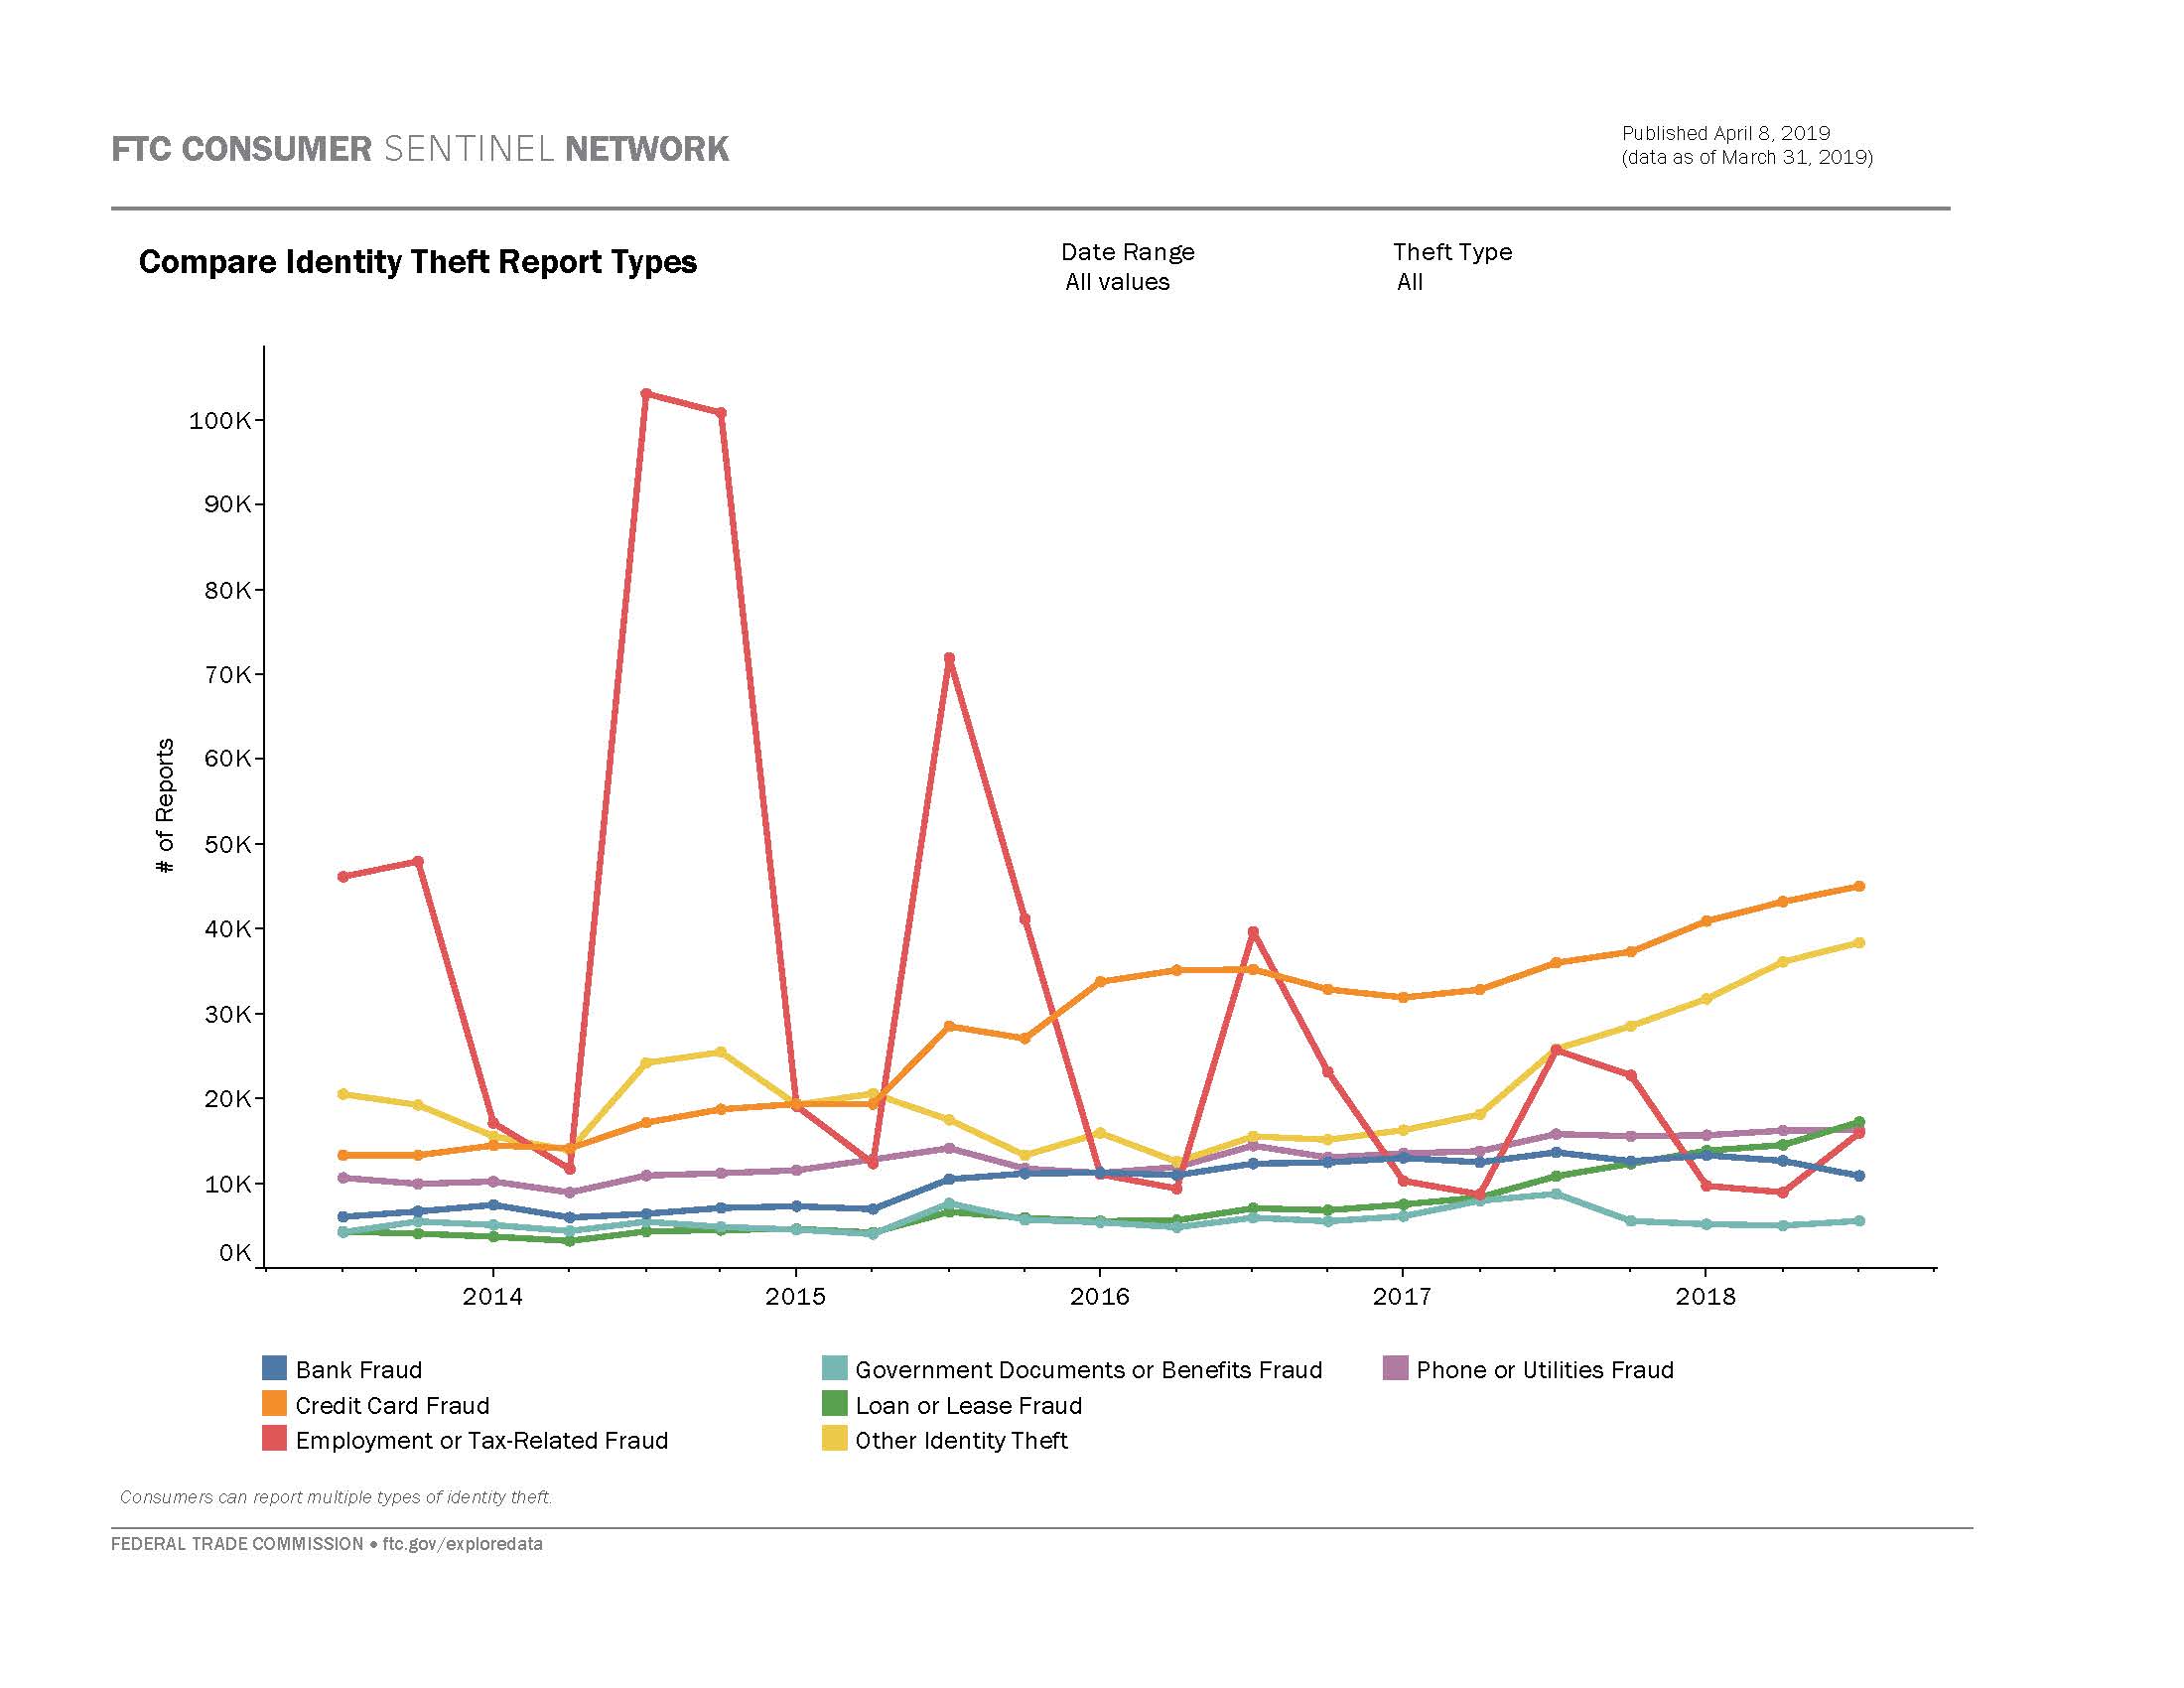 Link to interactive dashboard showing number of id theft reports by theft type over time.